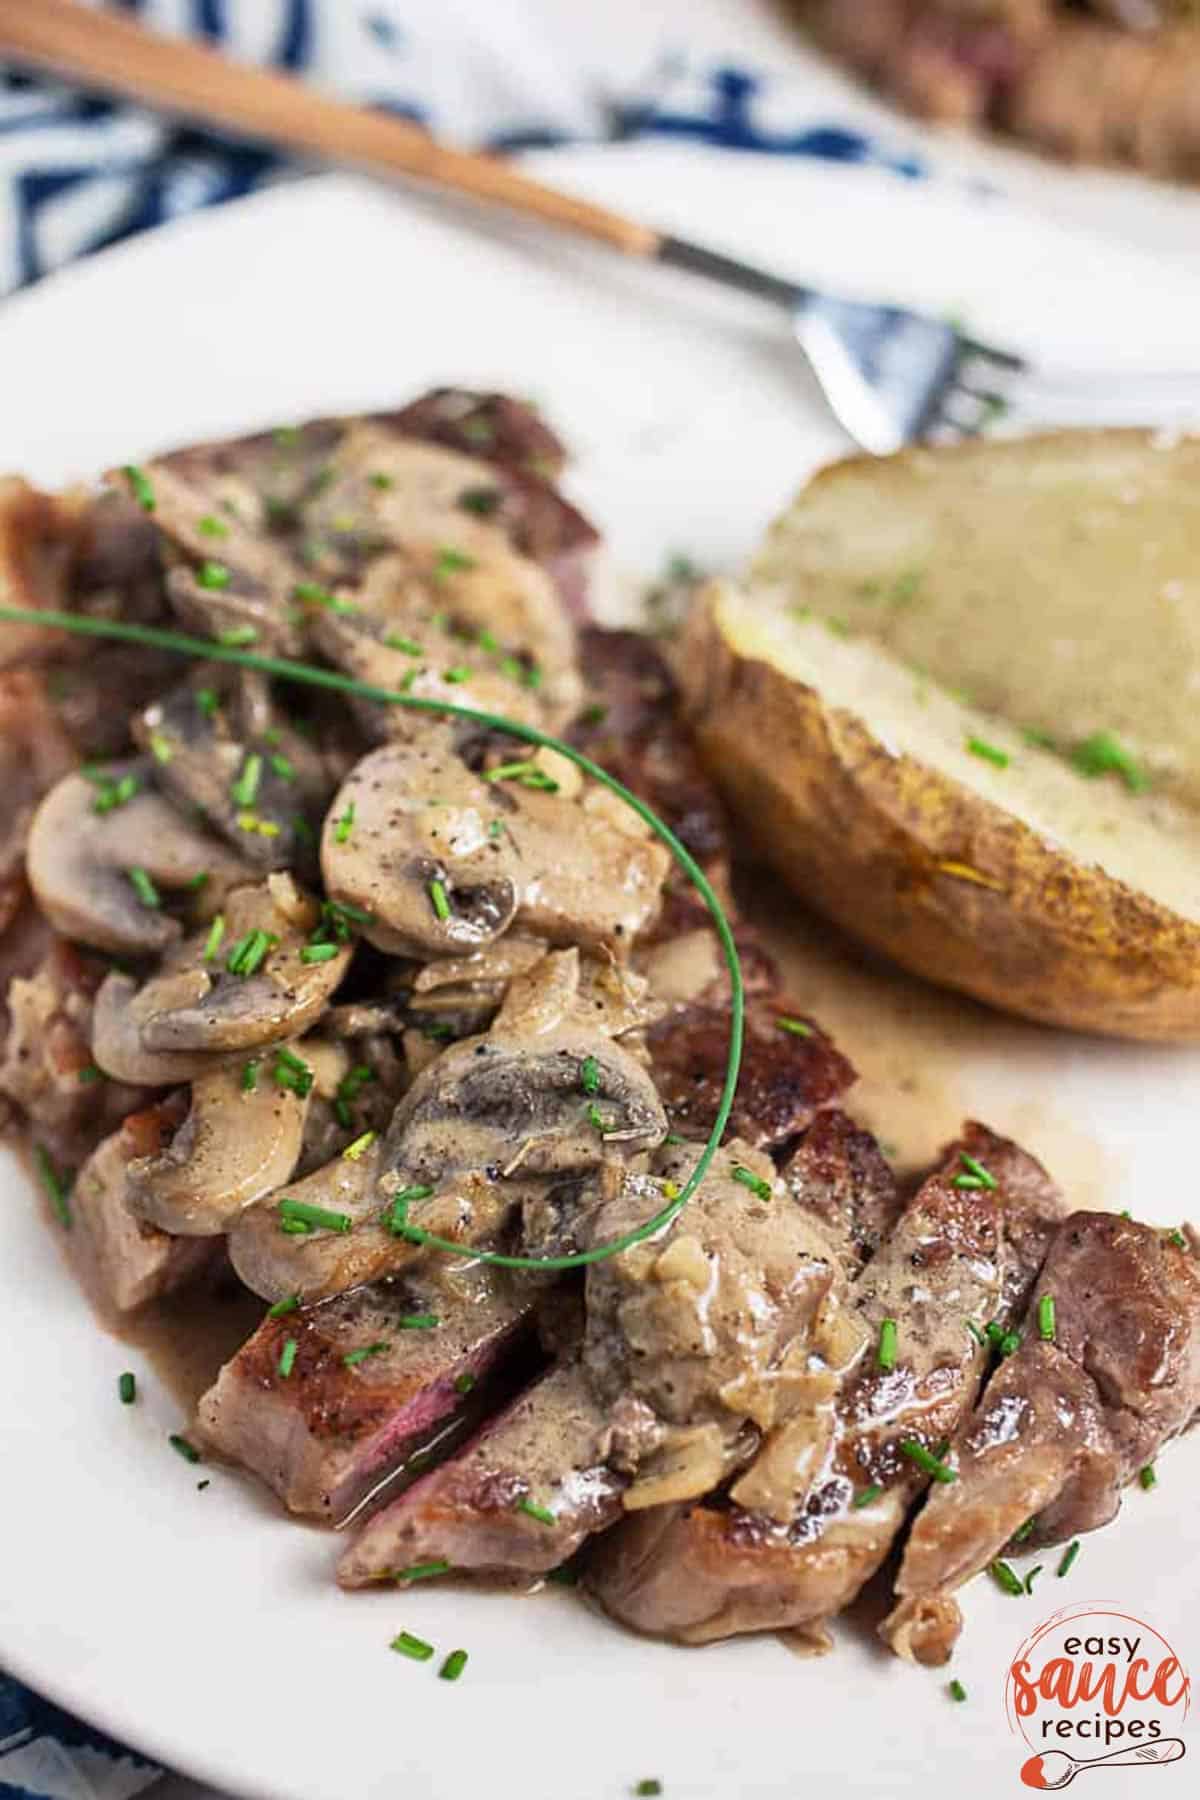 steak diane sliced on a plate with sauce and a baked potato